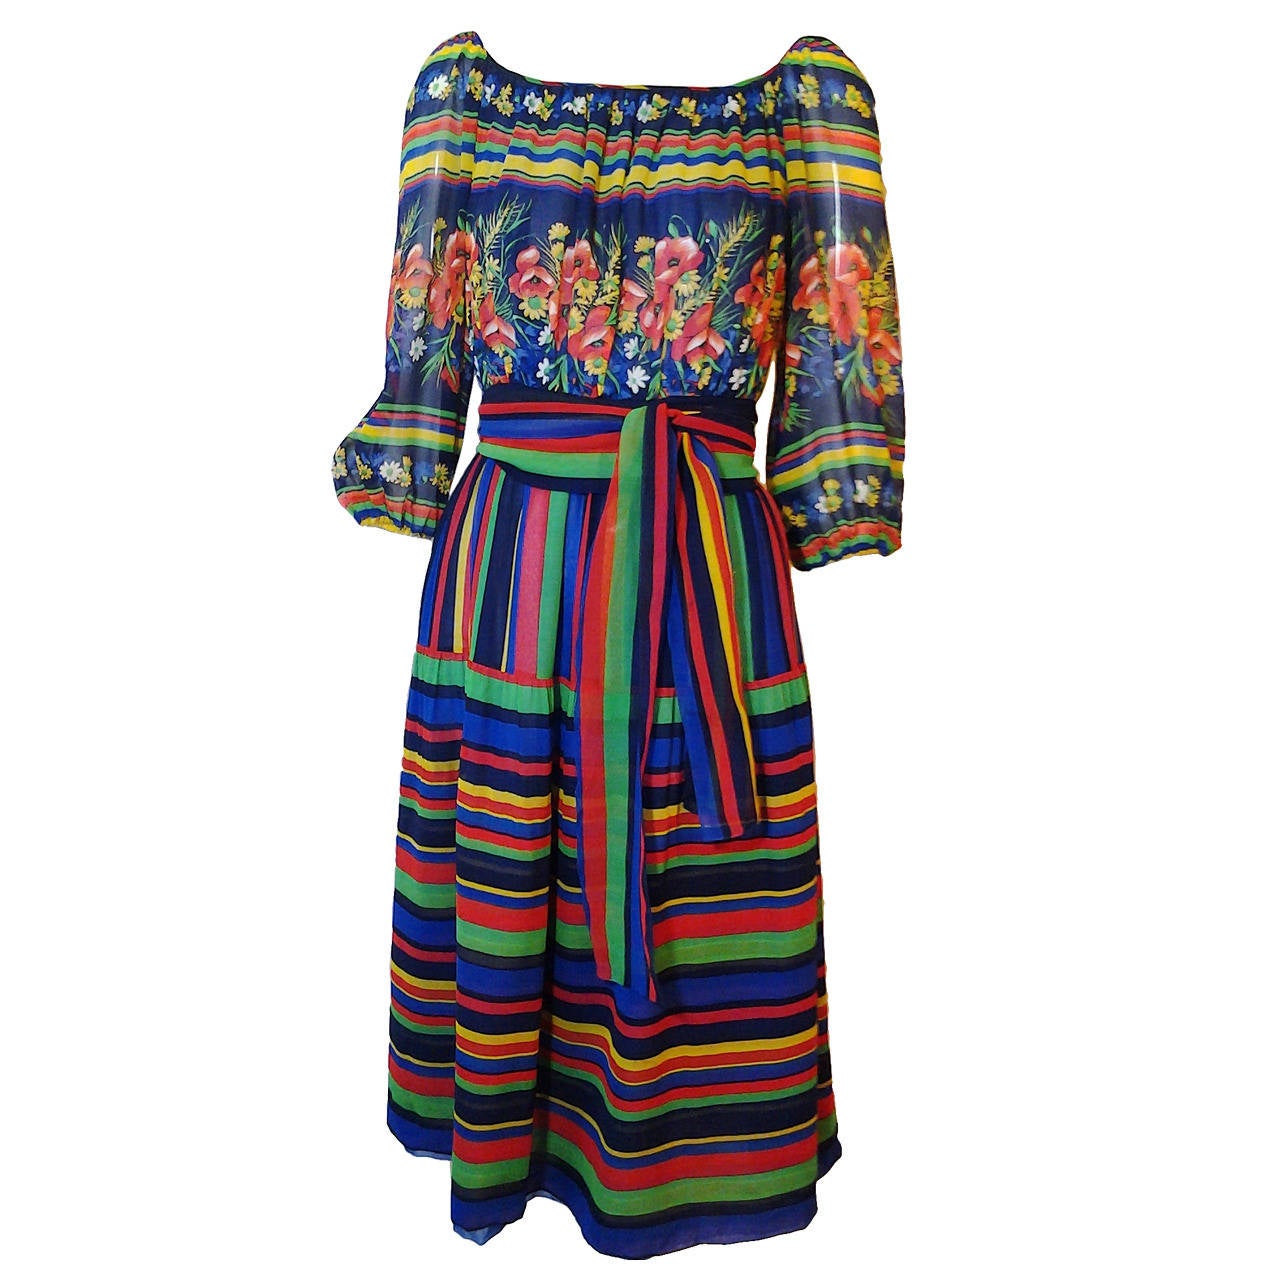 1970s Silk Chiffon Floral and Striped Peasant Dress